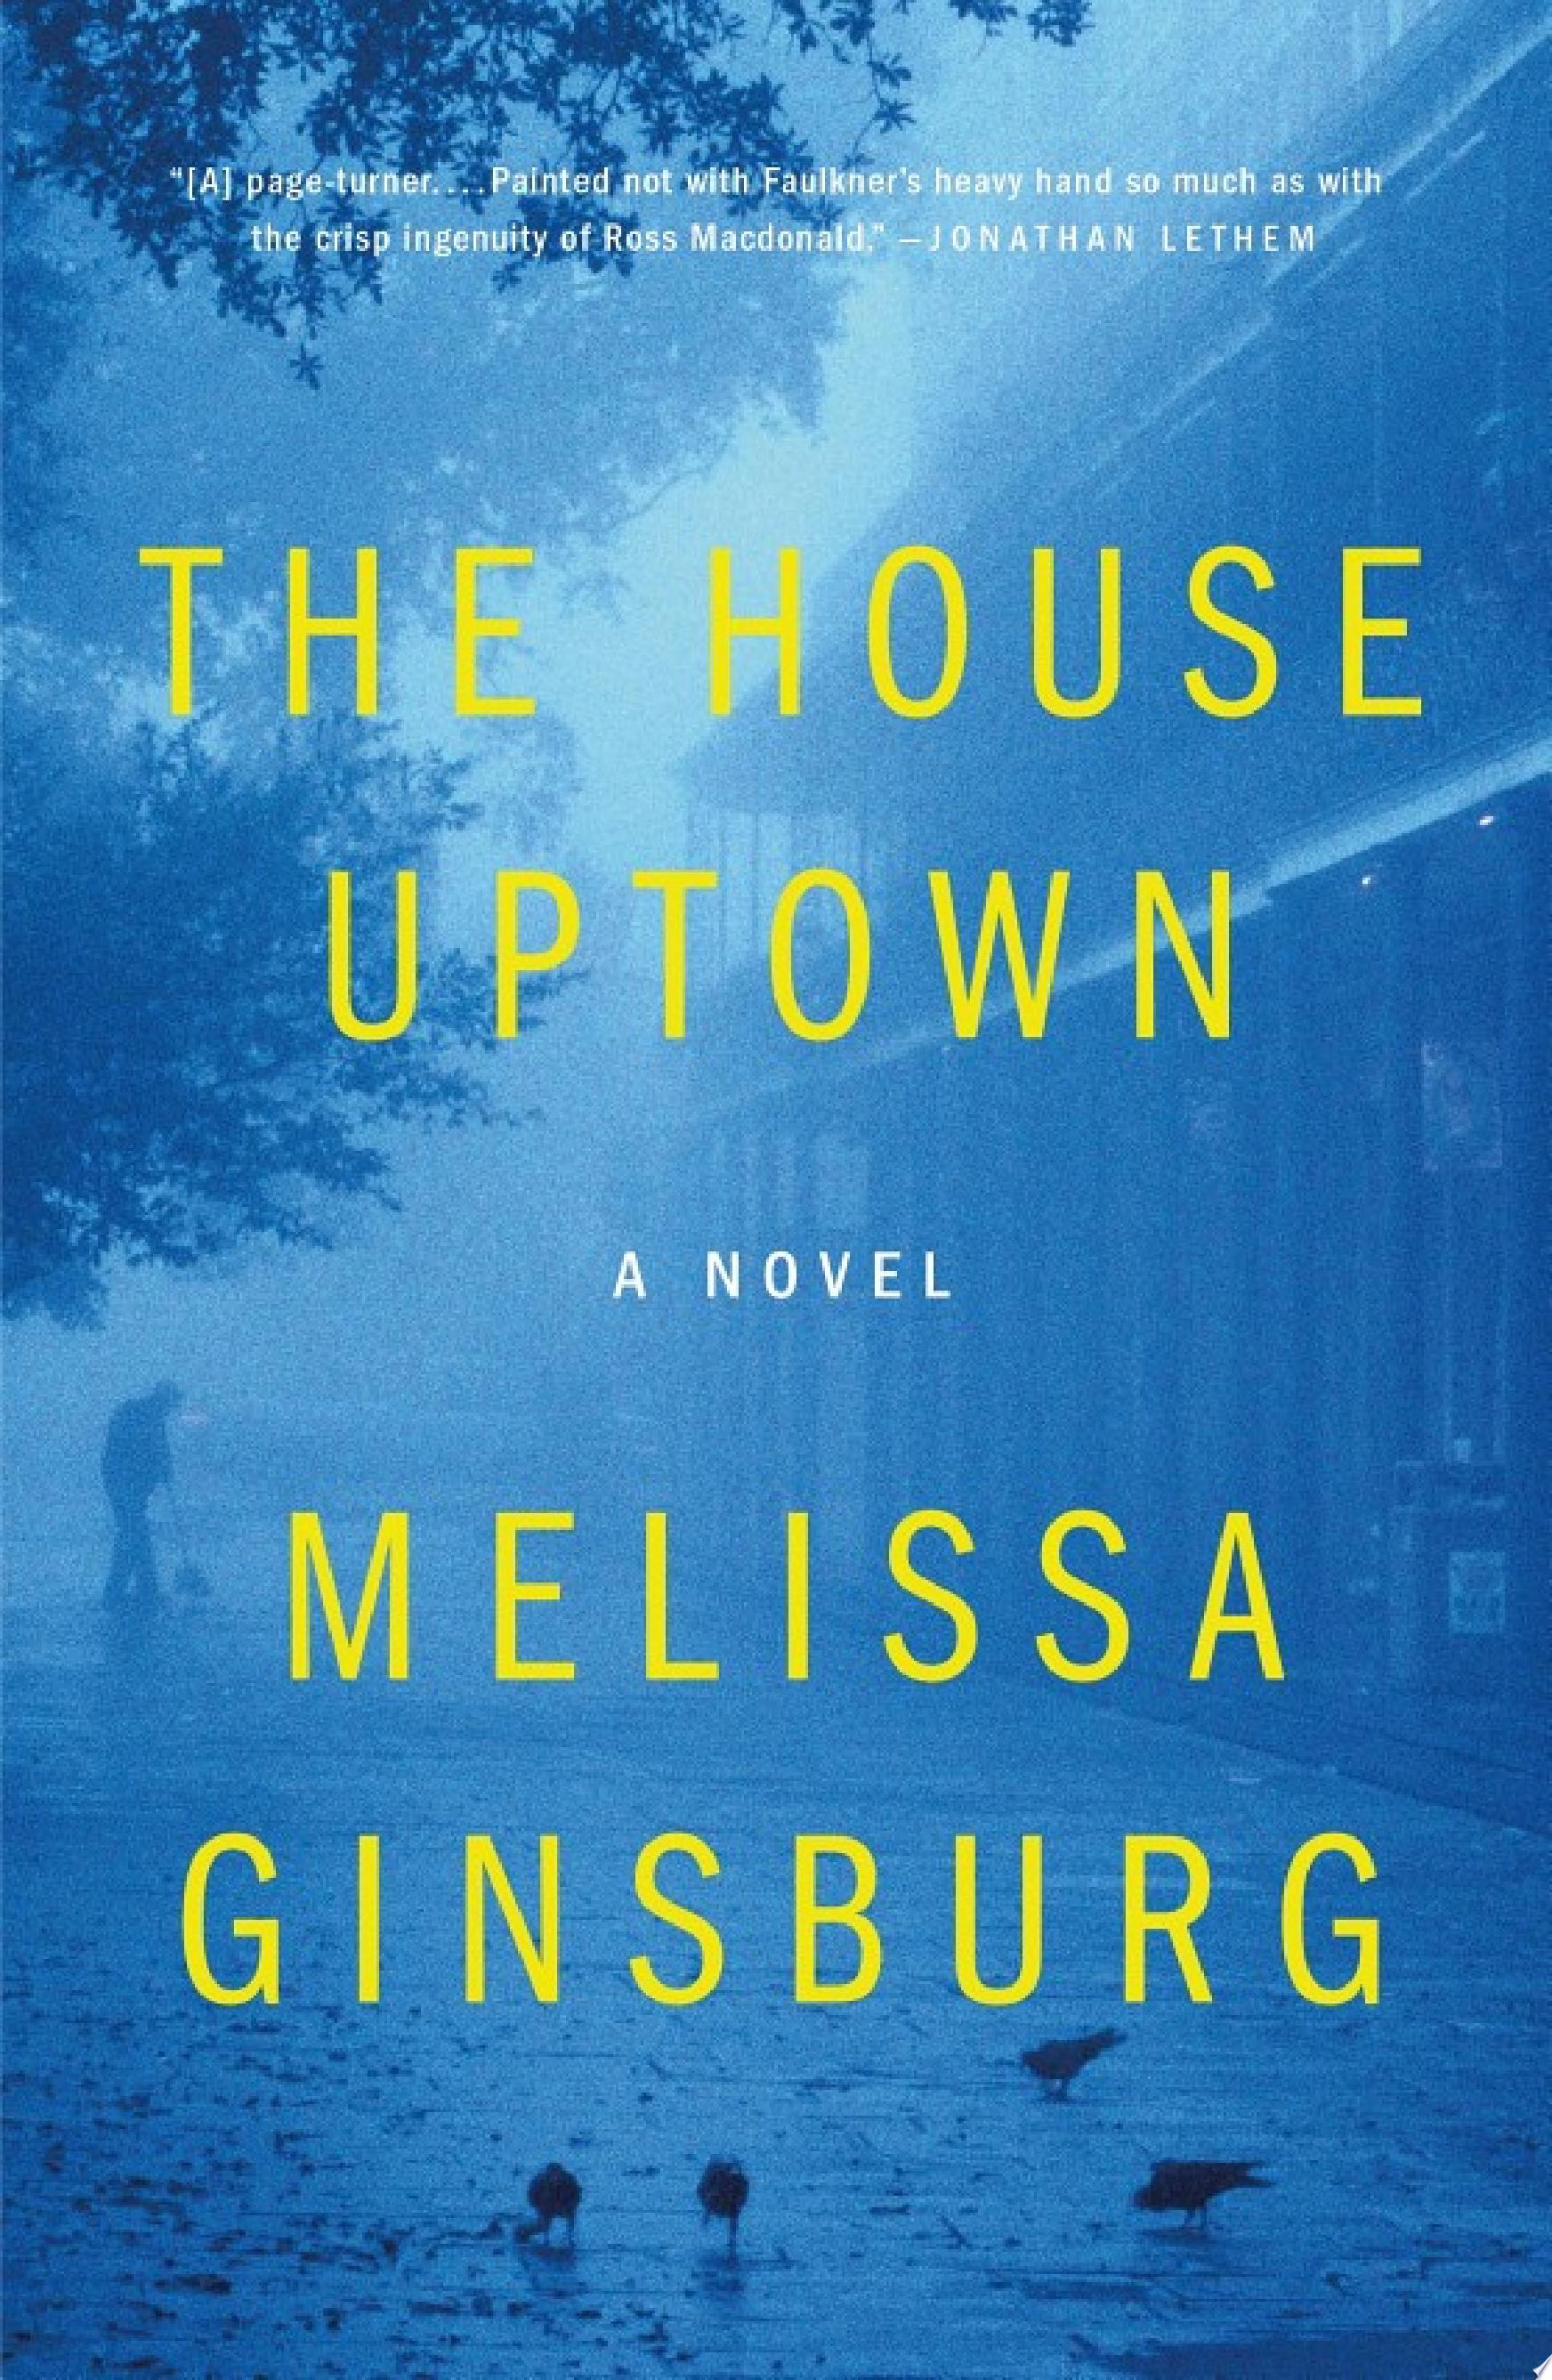 Image for "The House Uptown"